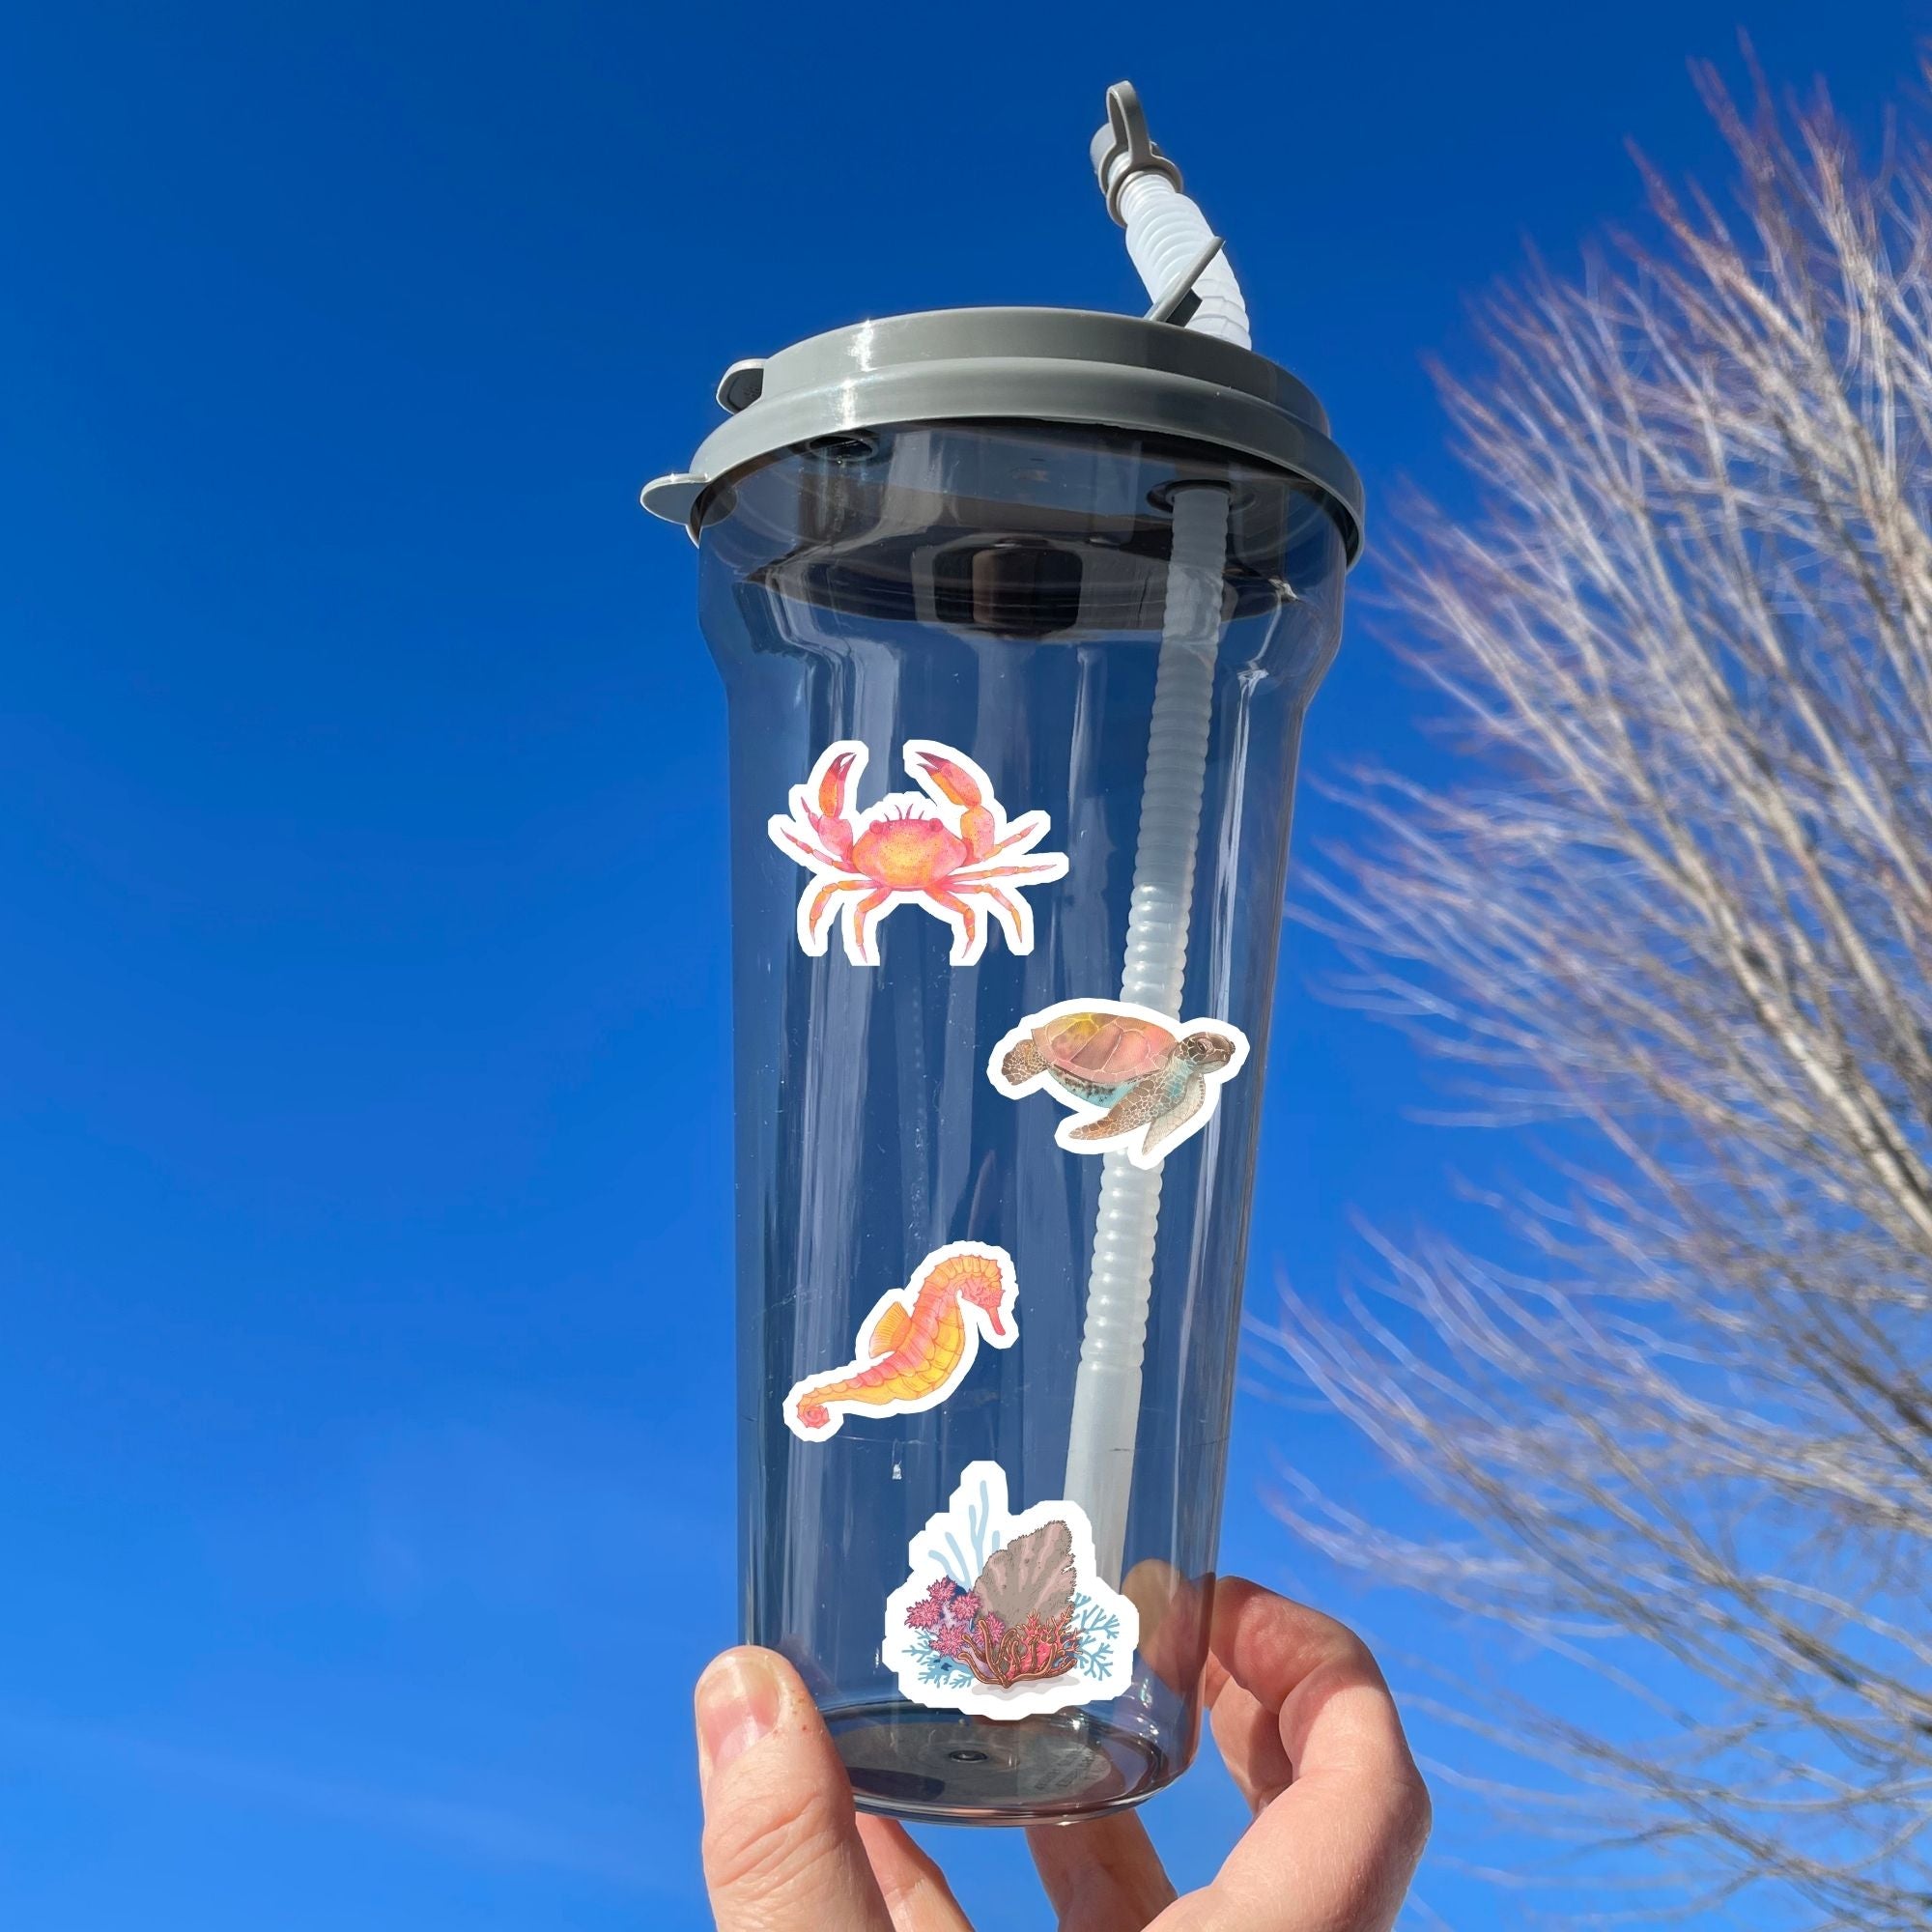 Teaming with sea life, this sticker sheet is filled with sticker images of fish, sea turtles, and coral! Take the reef with you anywhere with these beautiful stickers. This image shows a water bottle with stickers of a crab, a sea turtle, a seahorse, and a coral reef scene applied to it.